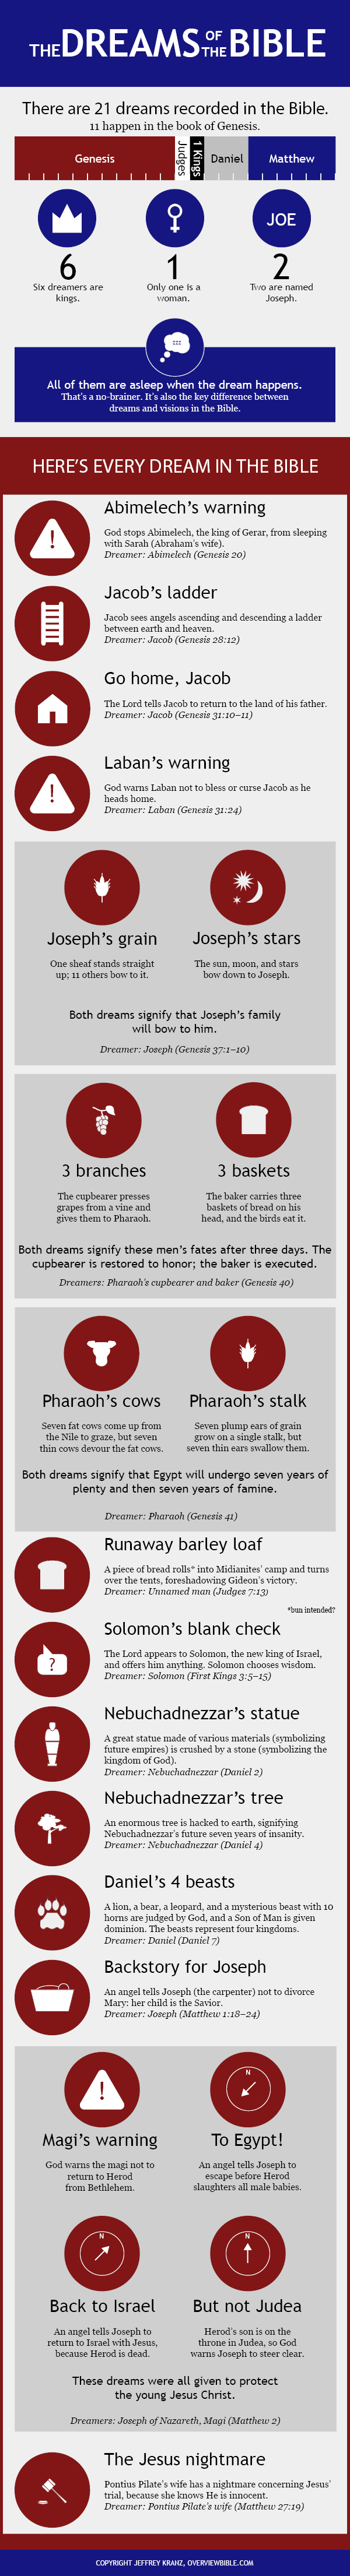 The Dreams of the Bible [Infographic] - ChurchMag